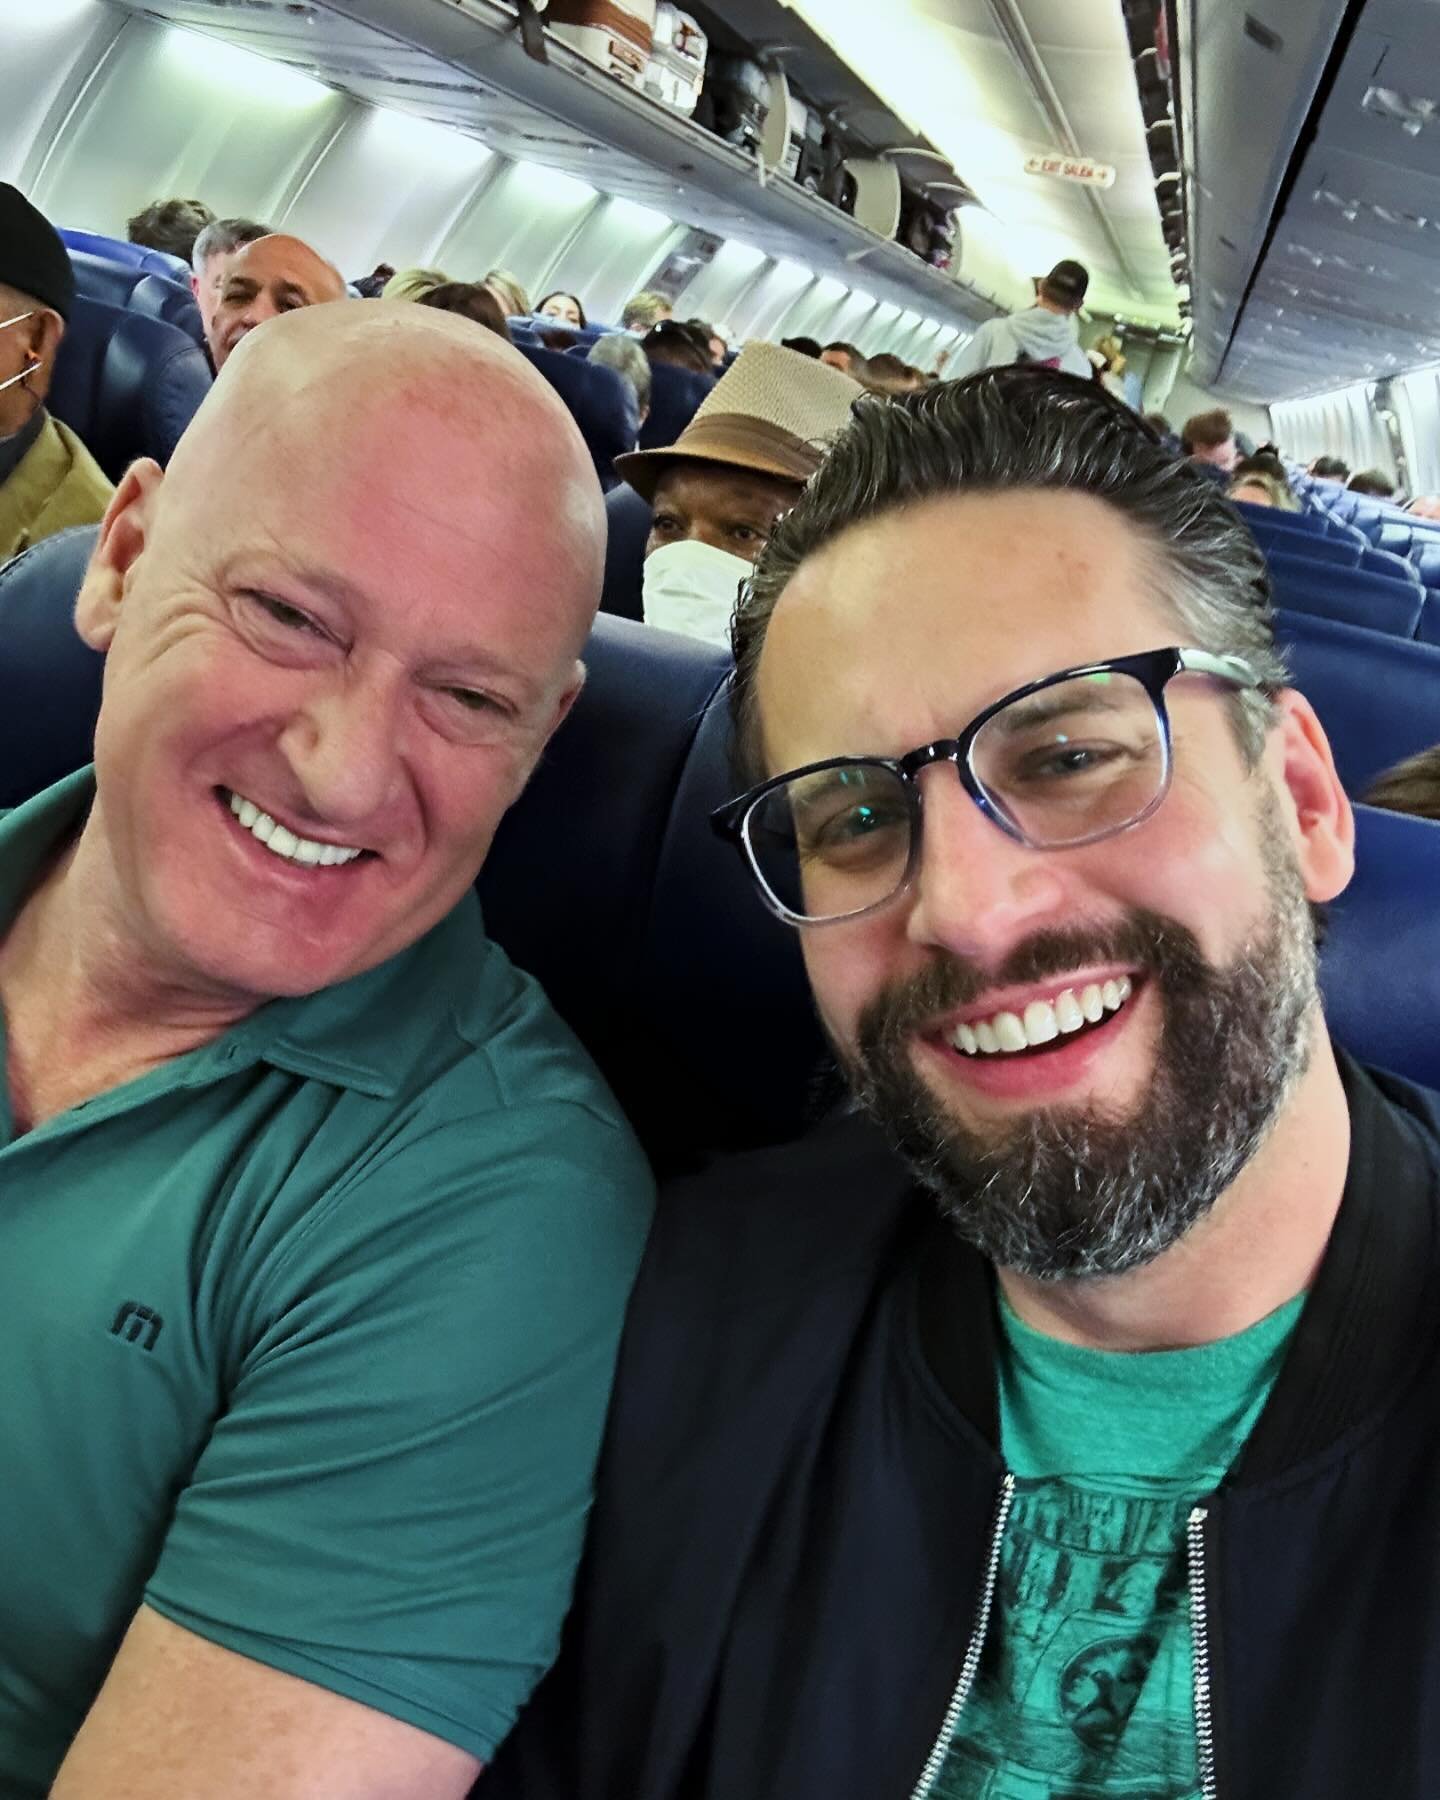 What a surprise and a joy to be in the middle seat on this early morning flight! I love life&rsquo;s little happy happenstance&rsquo;s! Safe travels @parsons_lonnie 🥰 #friends #travel #comeflywithme